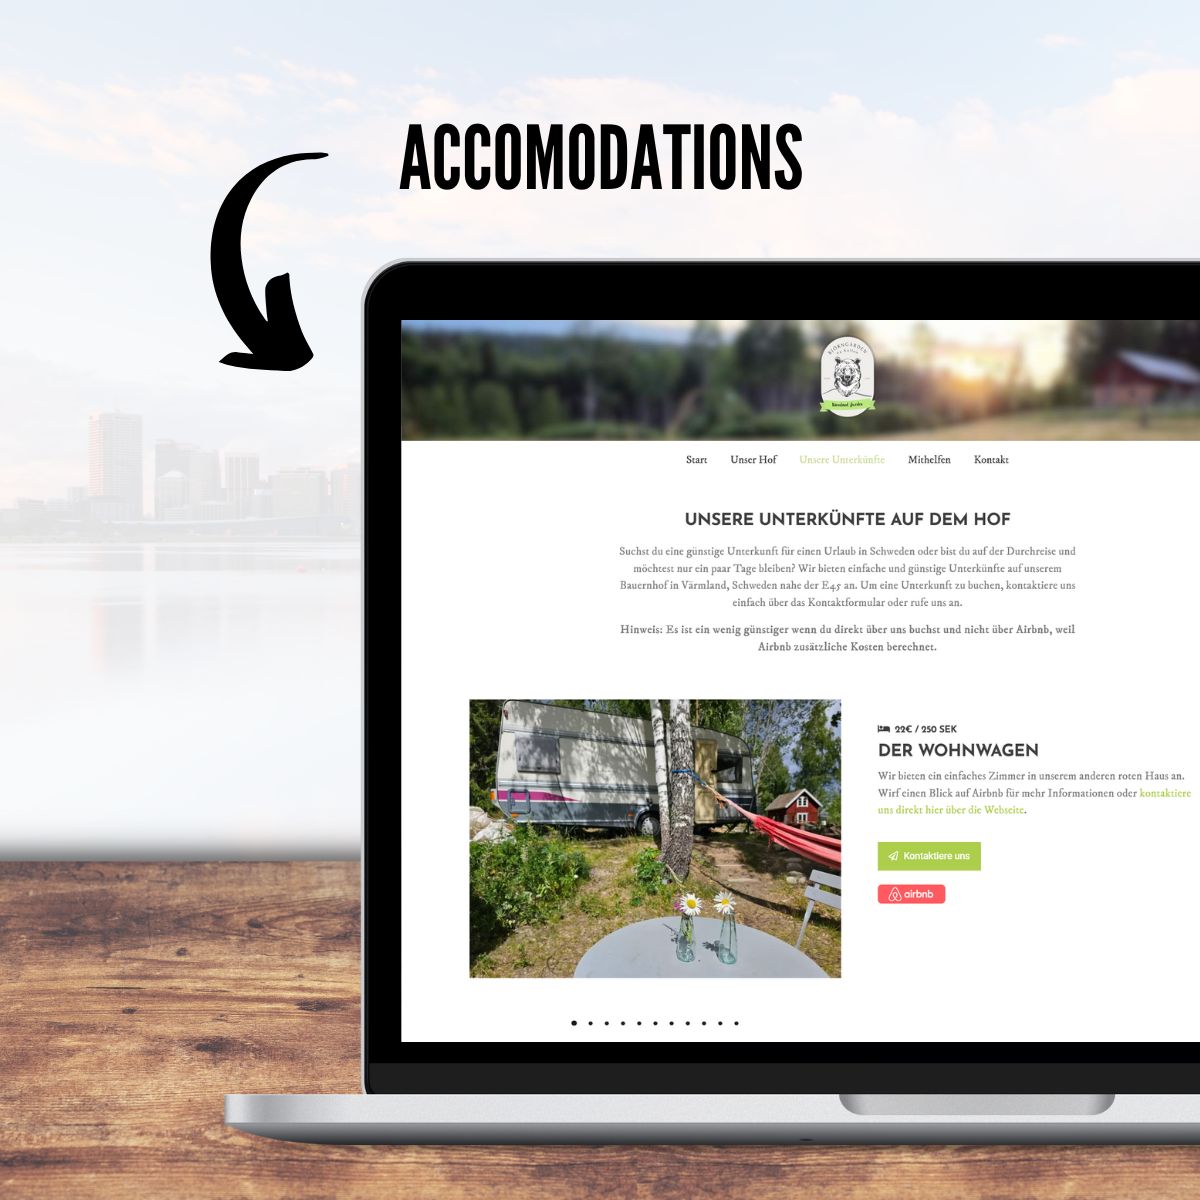 Creation of an page for accomodations